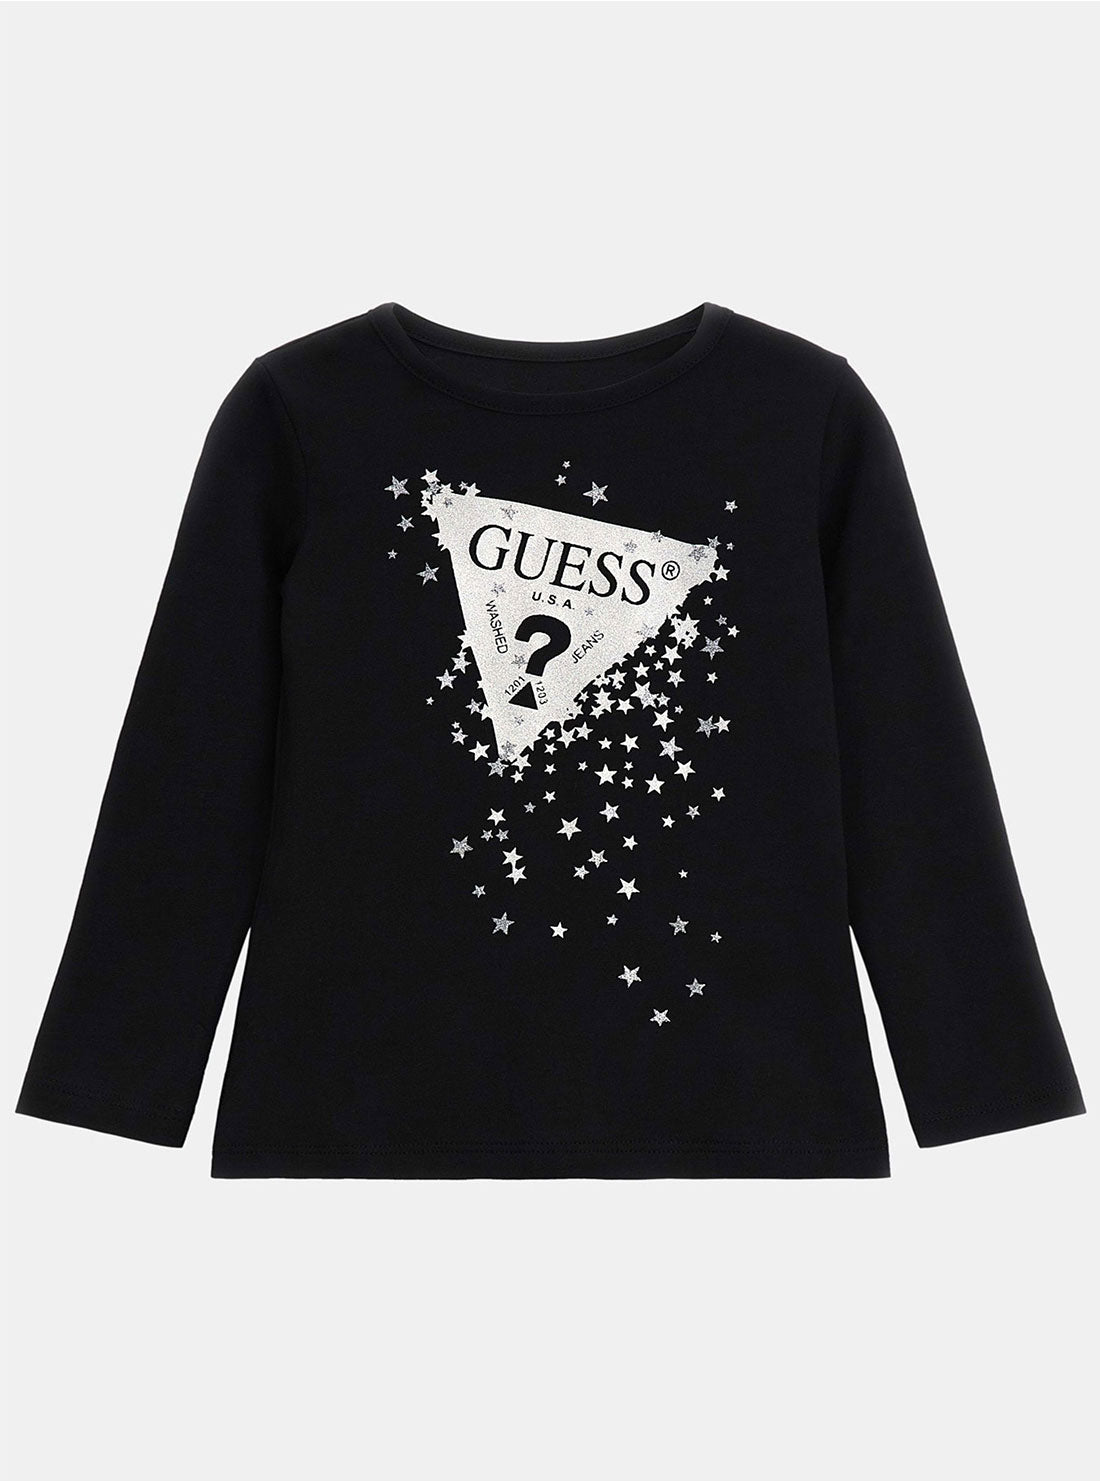 GUESS Black Long Sleeve T-Shirt (2-7) front view